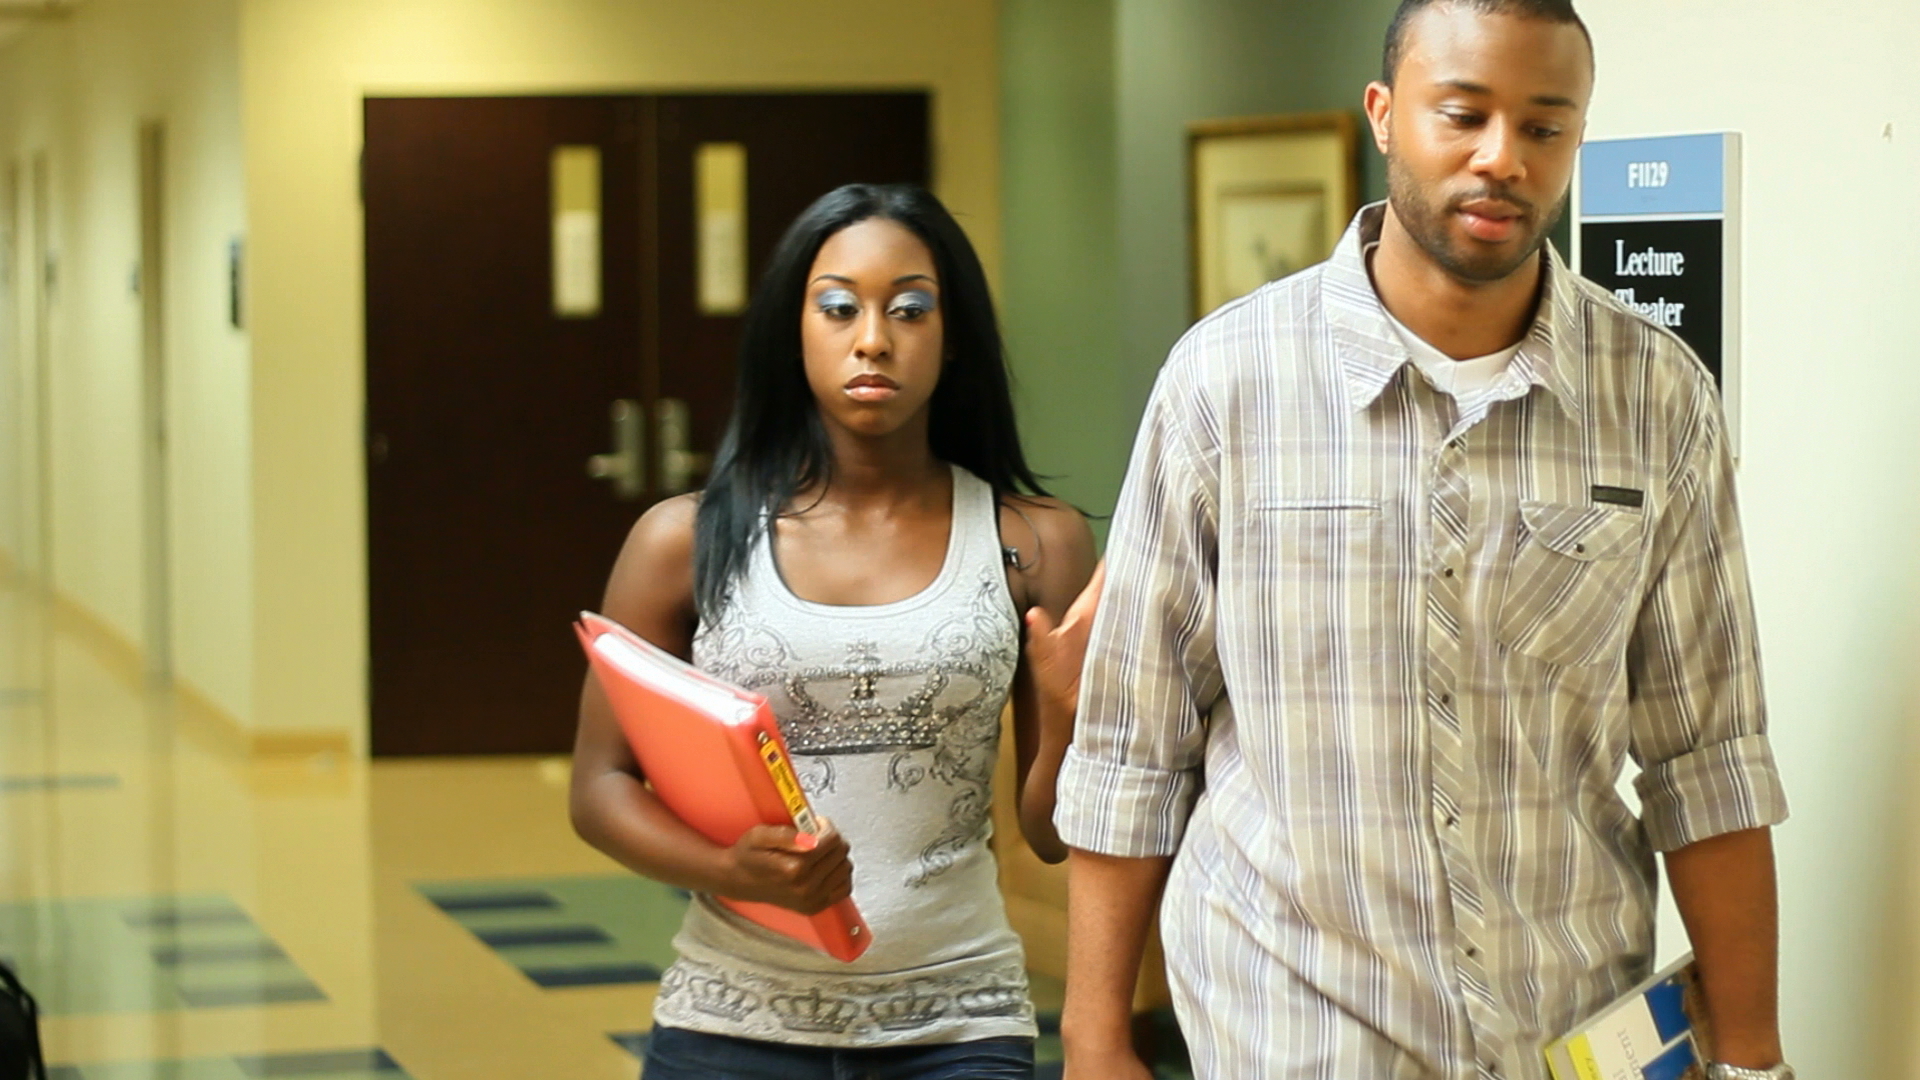 Jenesis (Rachelle Neal) walks in anger as Cassious causes them to get dismissed from class.